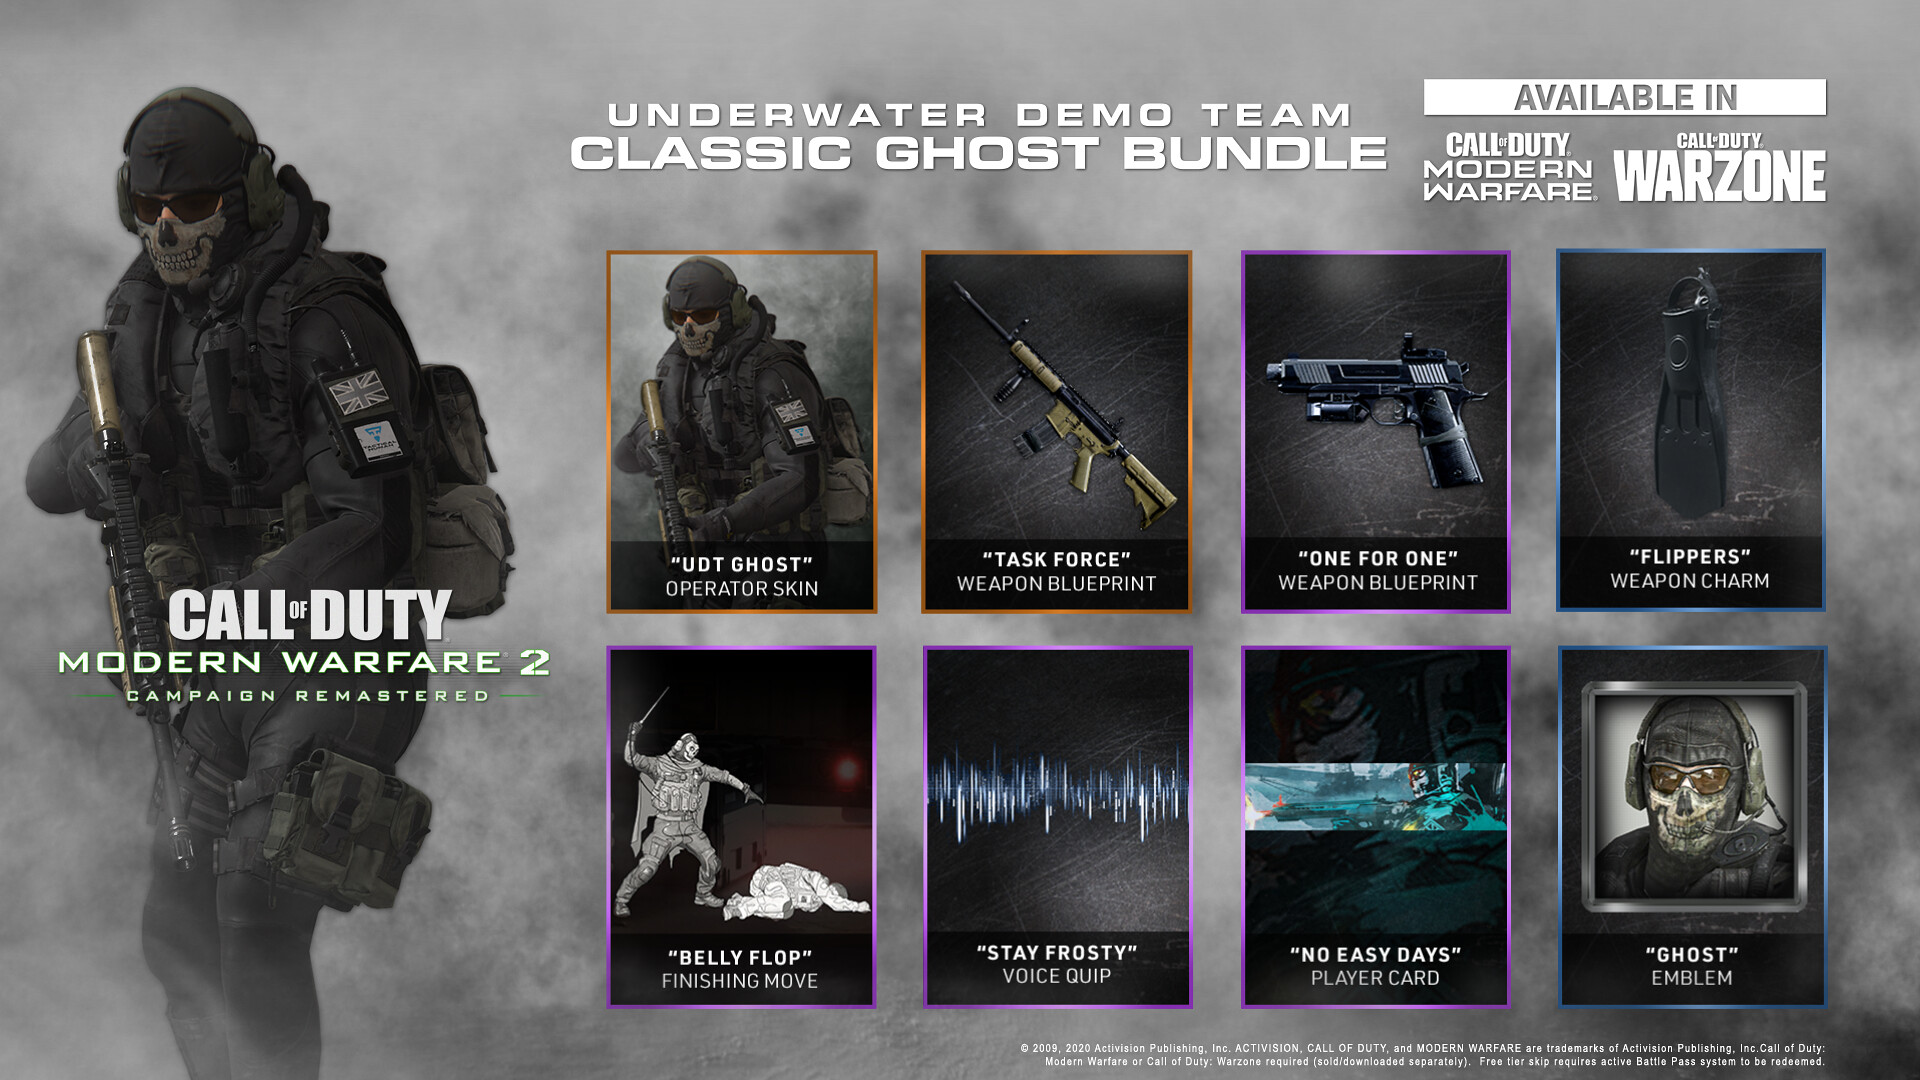 Call of Duty: Modern Warfare 2 Campaign Remastered - Underwater Demo Team Classic Ghost Bundle for Modern Warfare on PS4